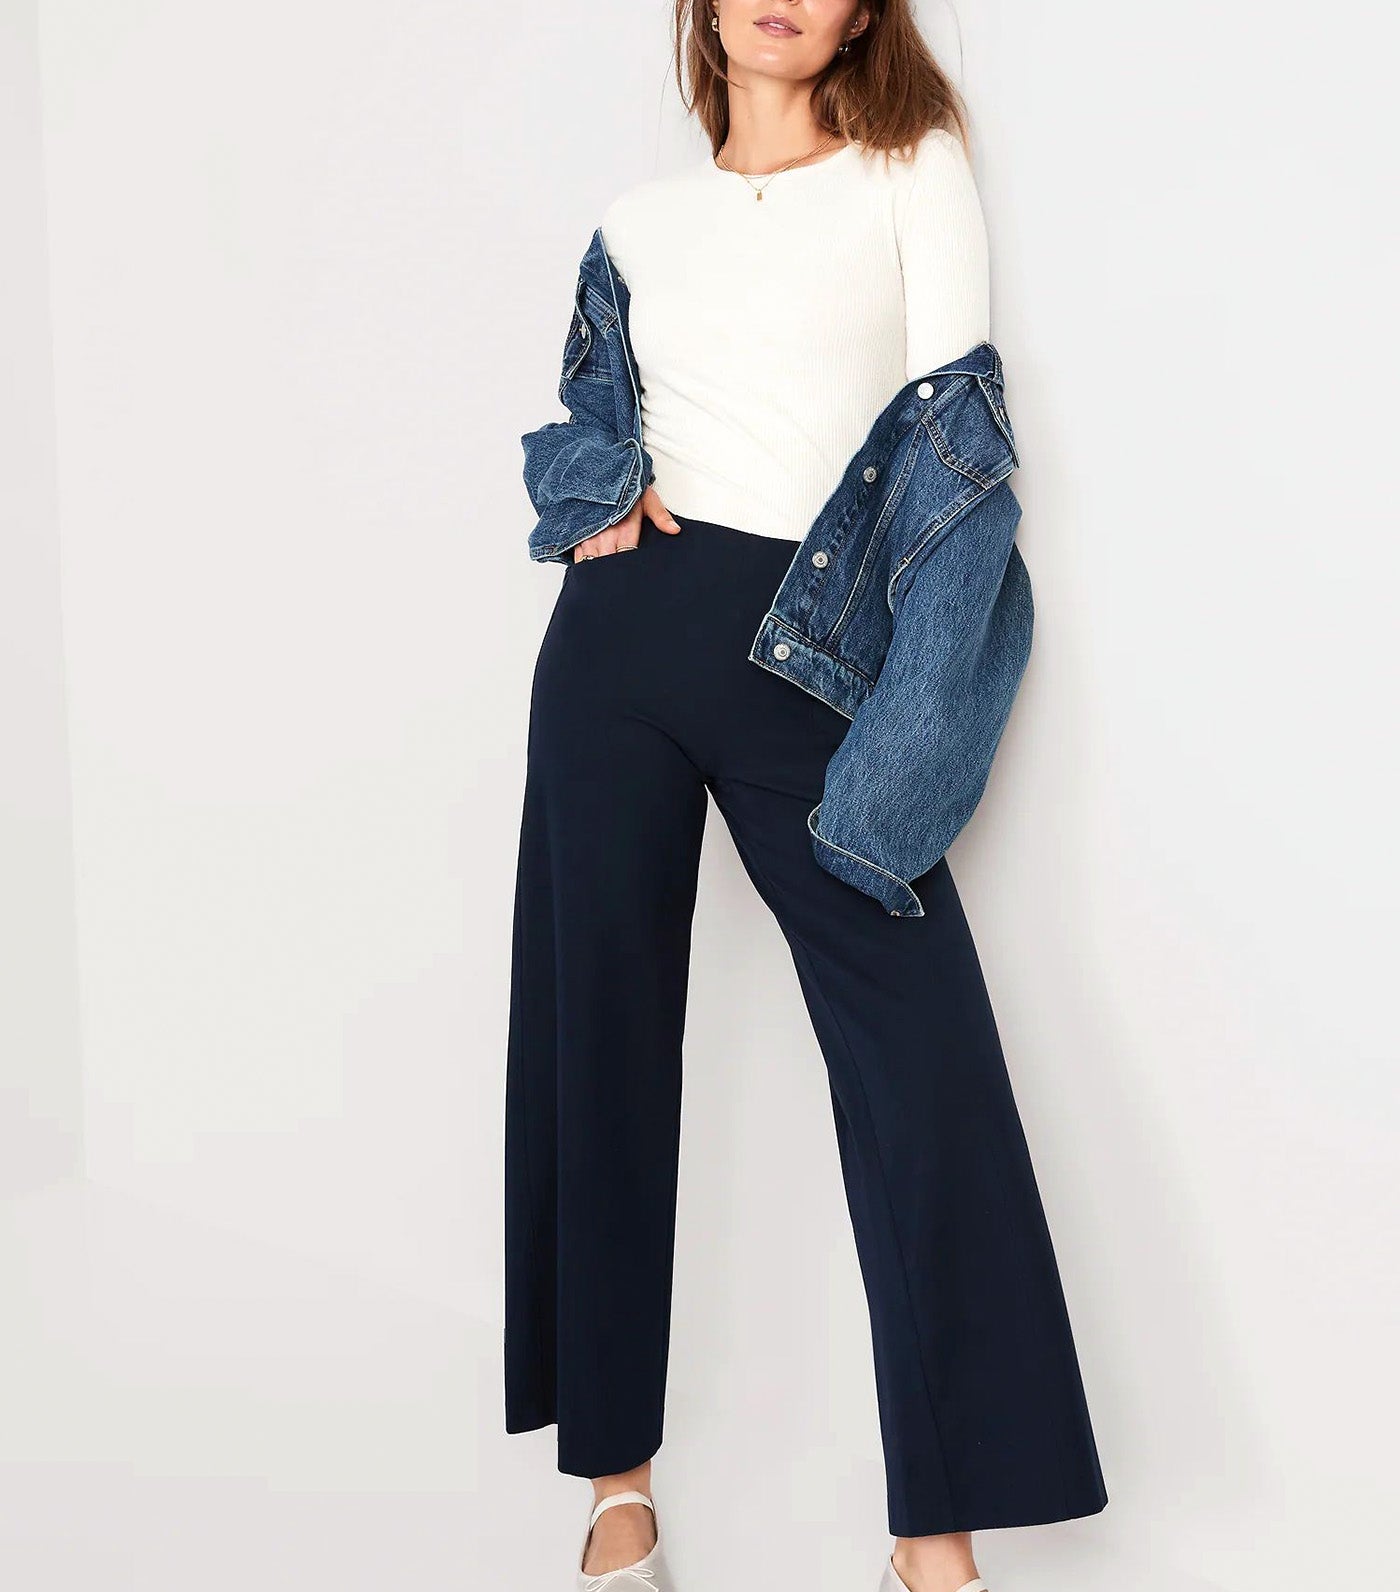 High-Waisted Pull-On Pixie Wide-Leg Pants for Women In The Navy